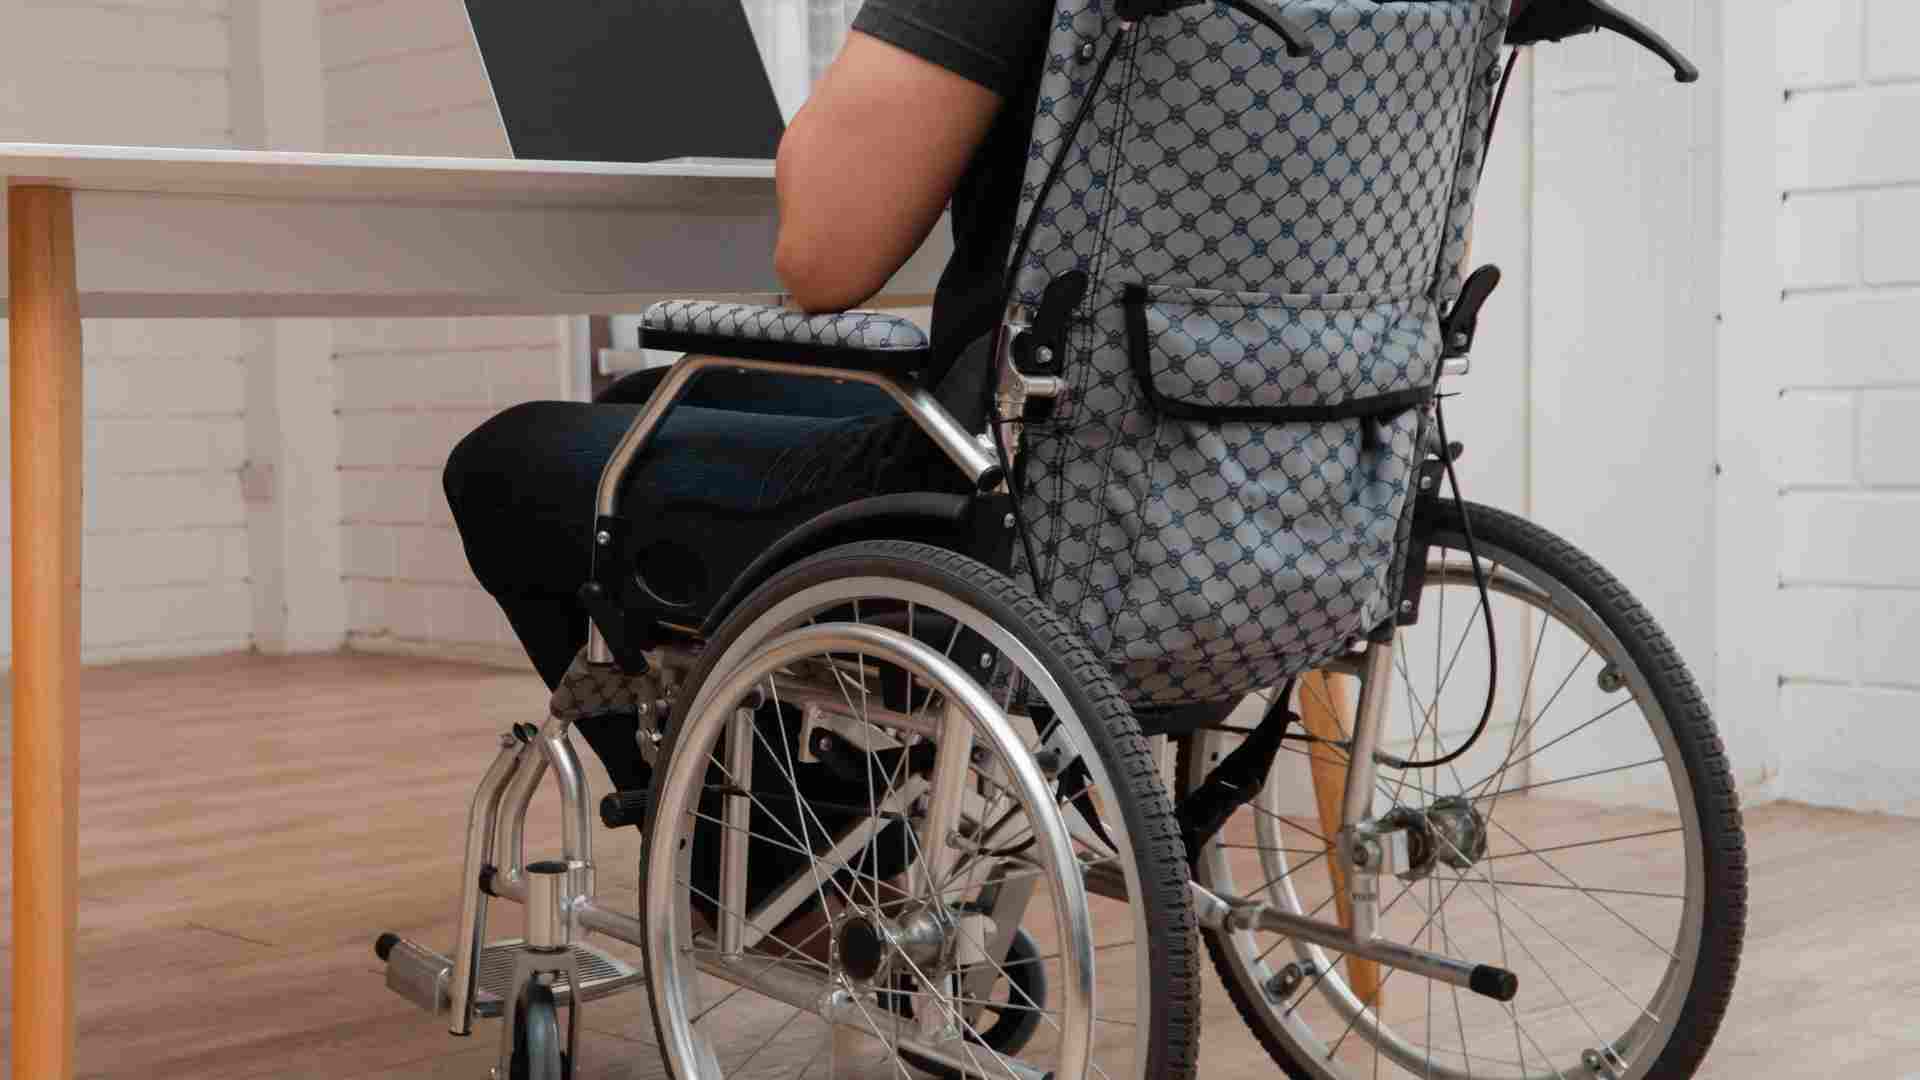 SSDI payments and eligible recipients to cash disability benefts worth up to $3,627